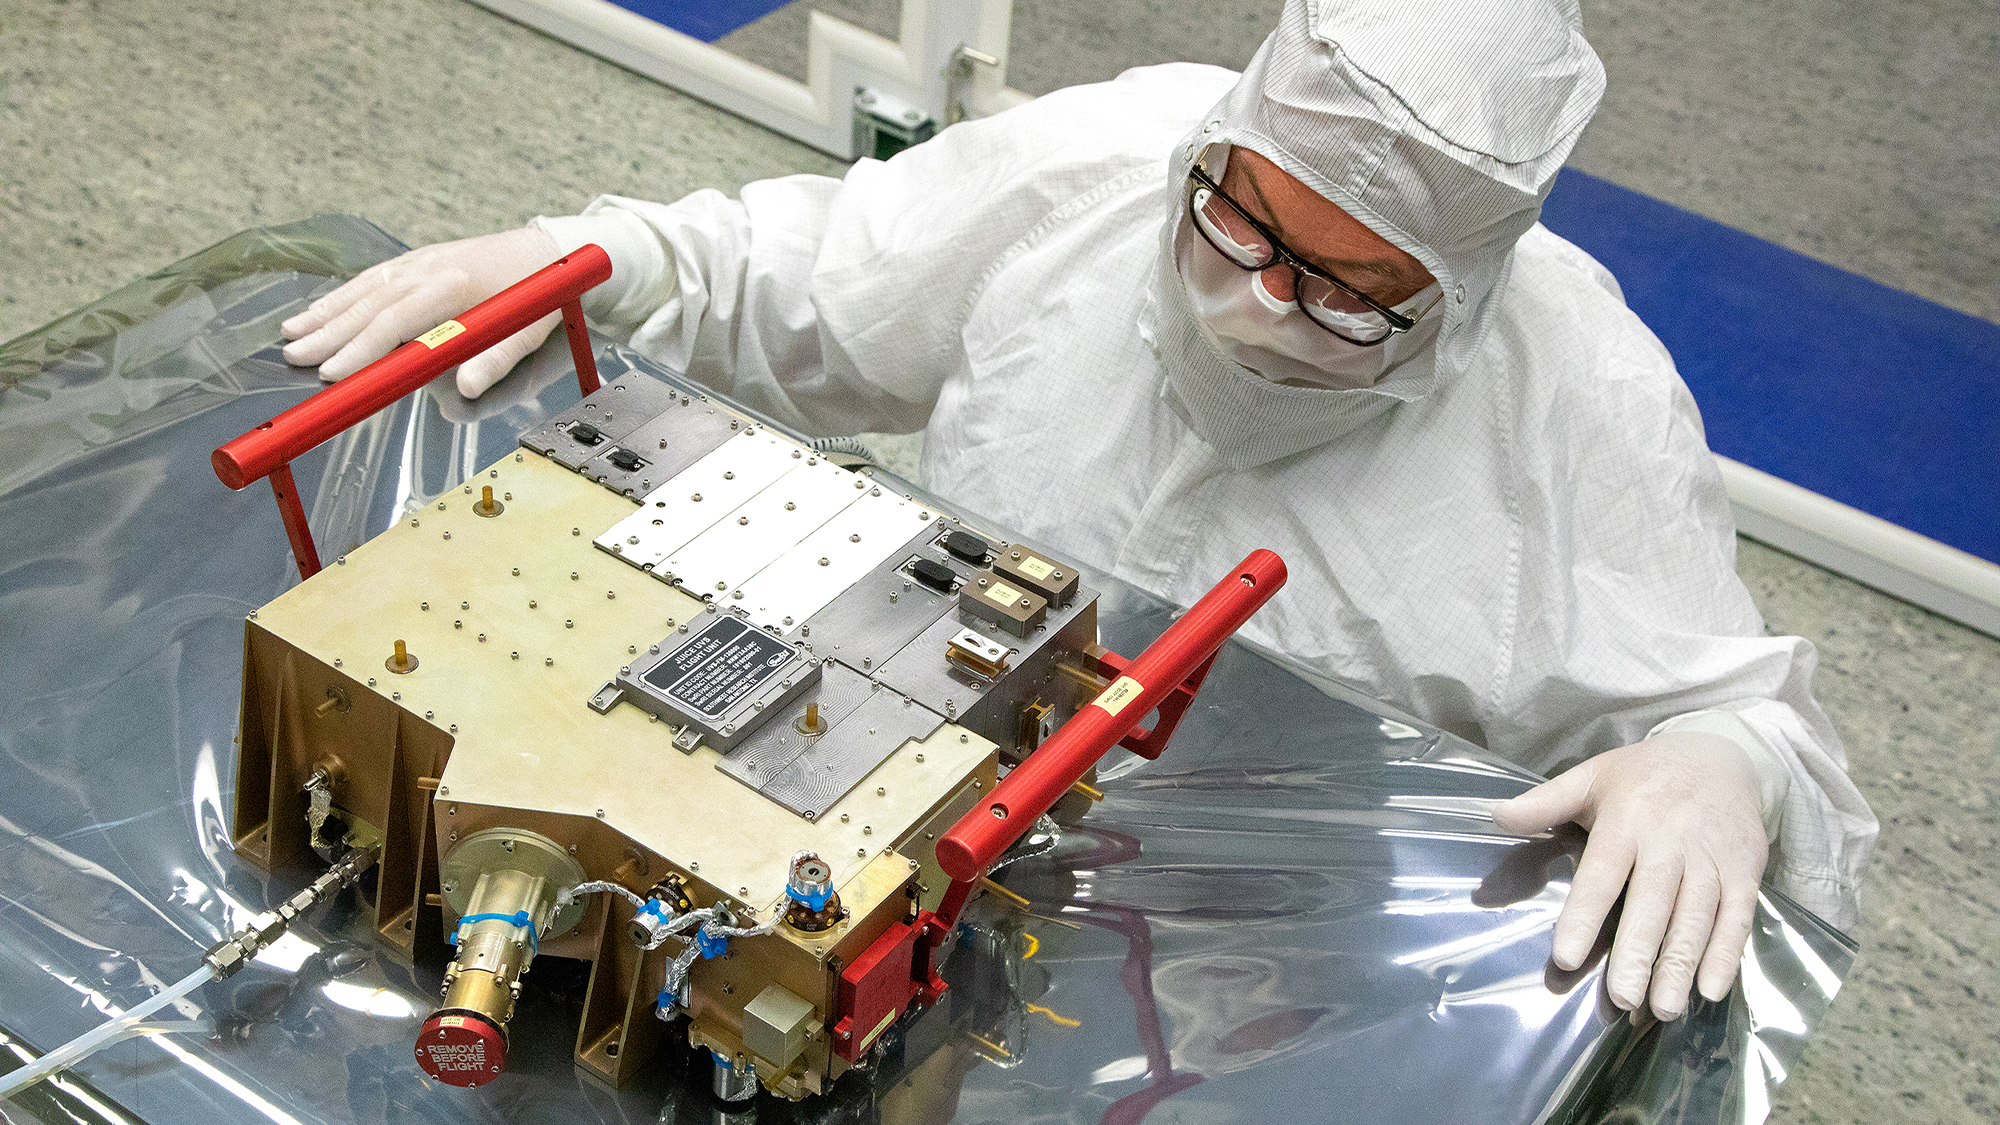 A Southwest Research Institute scientist named Norm Pelletier is wearing all white protective gear as he prepares the Ultraviolet Spectrograph (UVS) for delivery and integration onto the European Space Agency’s JUICE spacecraft. As part of a 10-instrument payload to study Jupiter and its large moons, UVS will measure ultraviolet spectra that scientists will use to study the composition and structure of the atmospheres of these bodies and how they interact with Jupiter’s massive magnetosphere.